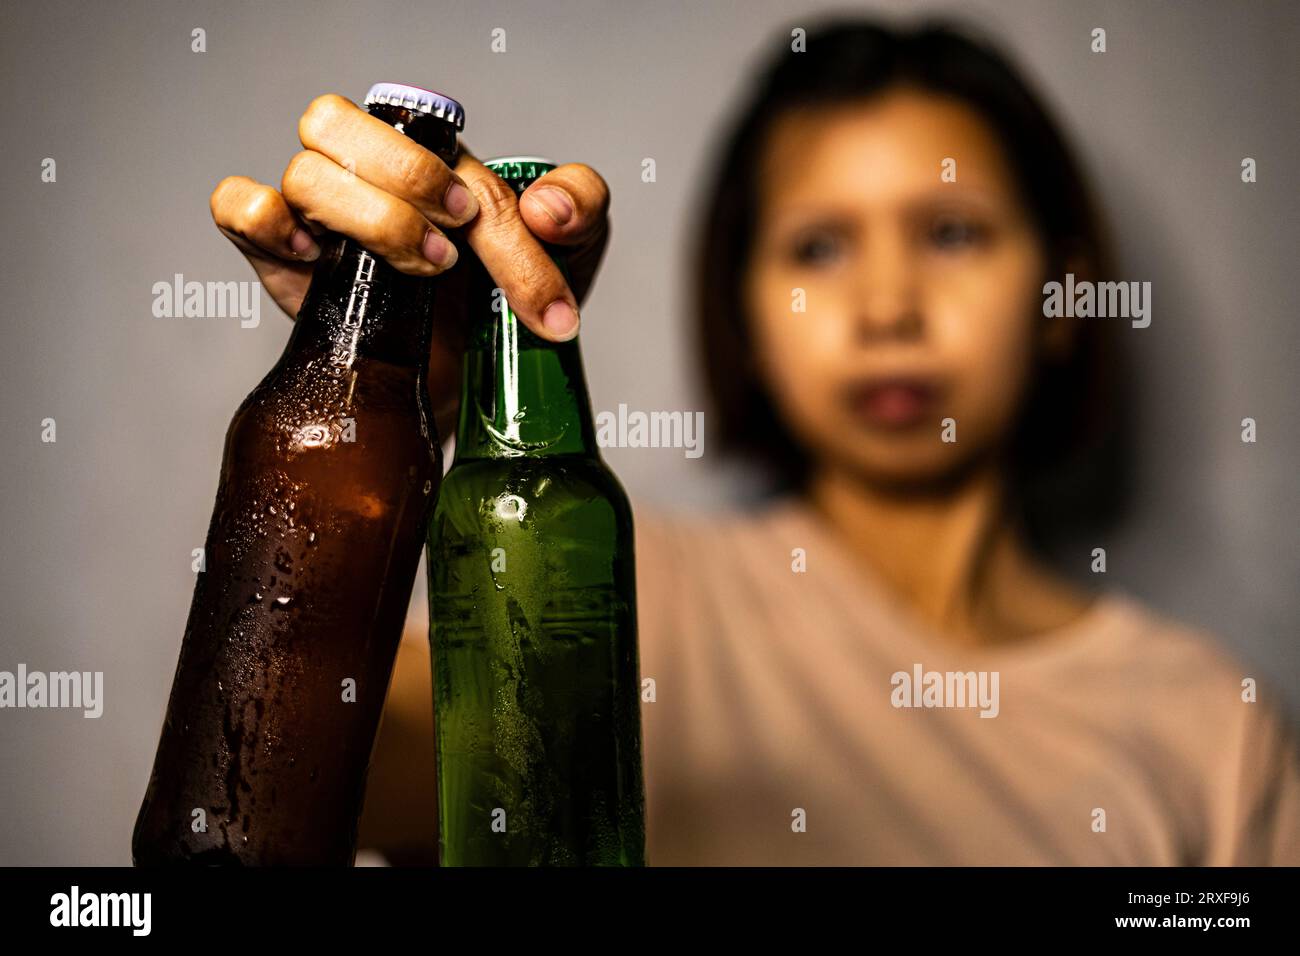 Pouring Beer In Glass Backgrounds for advertisements and wallpapers in party and drinking scene. Actual images in decorating ideas. Stock Photo